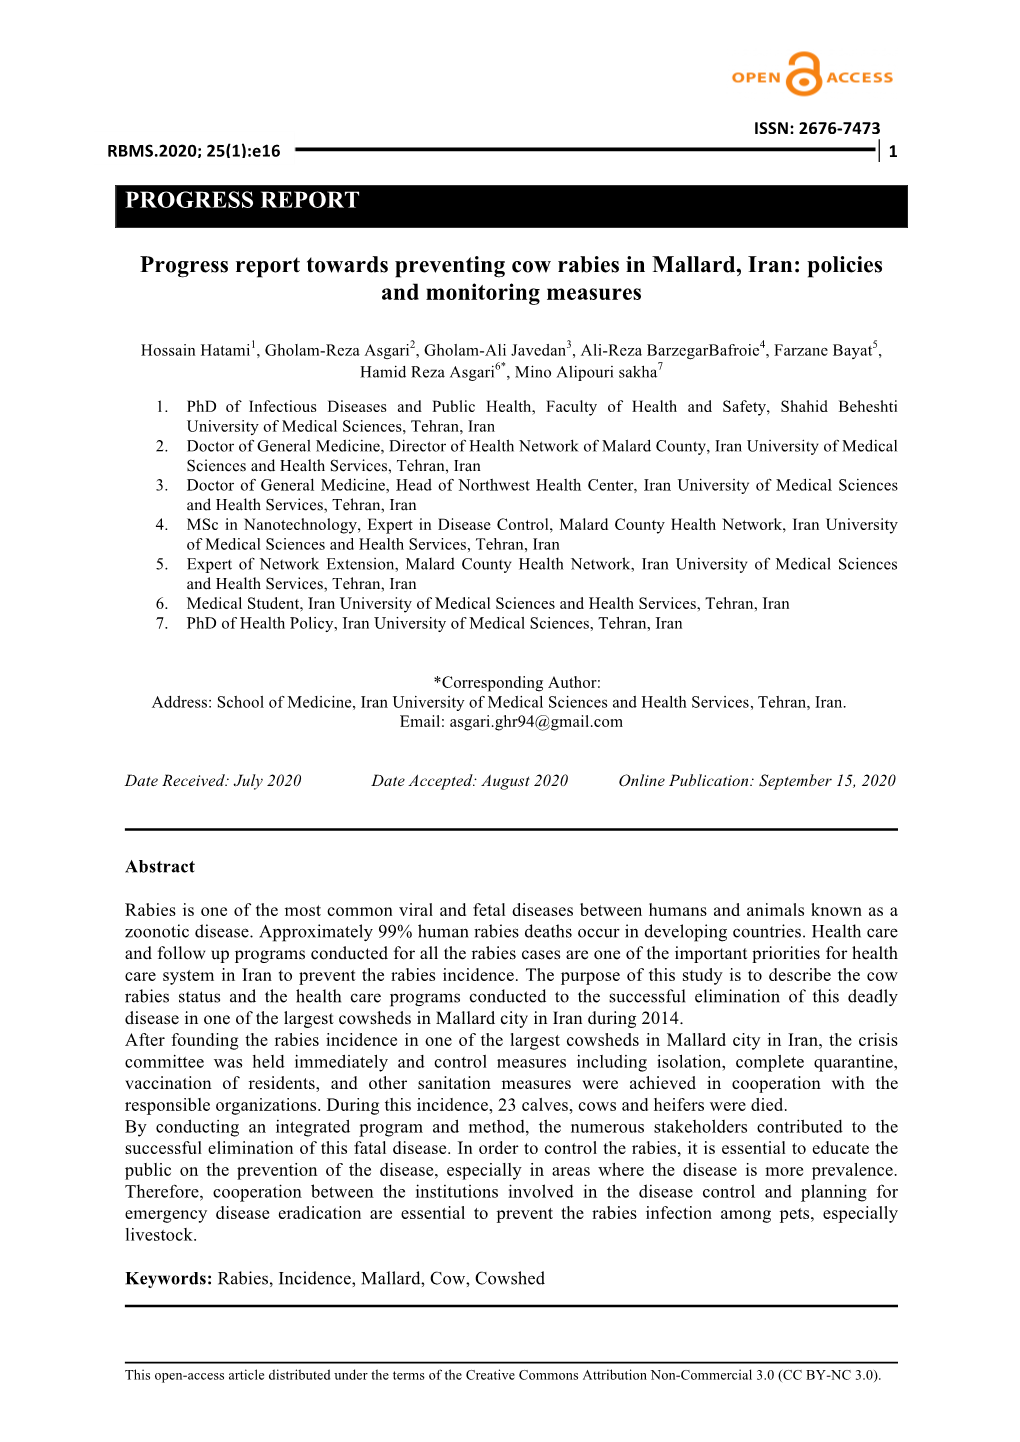 Progress Report Towards Preventing Cow Rabies in Mallard, Iran: Policies and Monitoring Measures